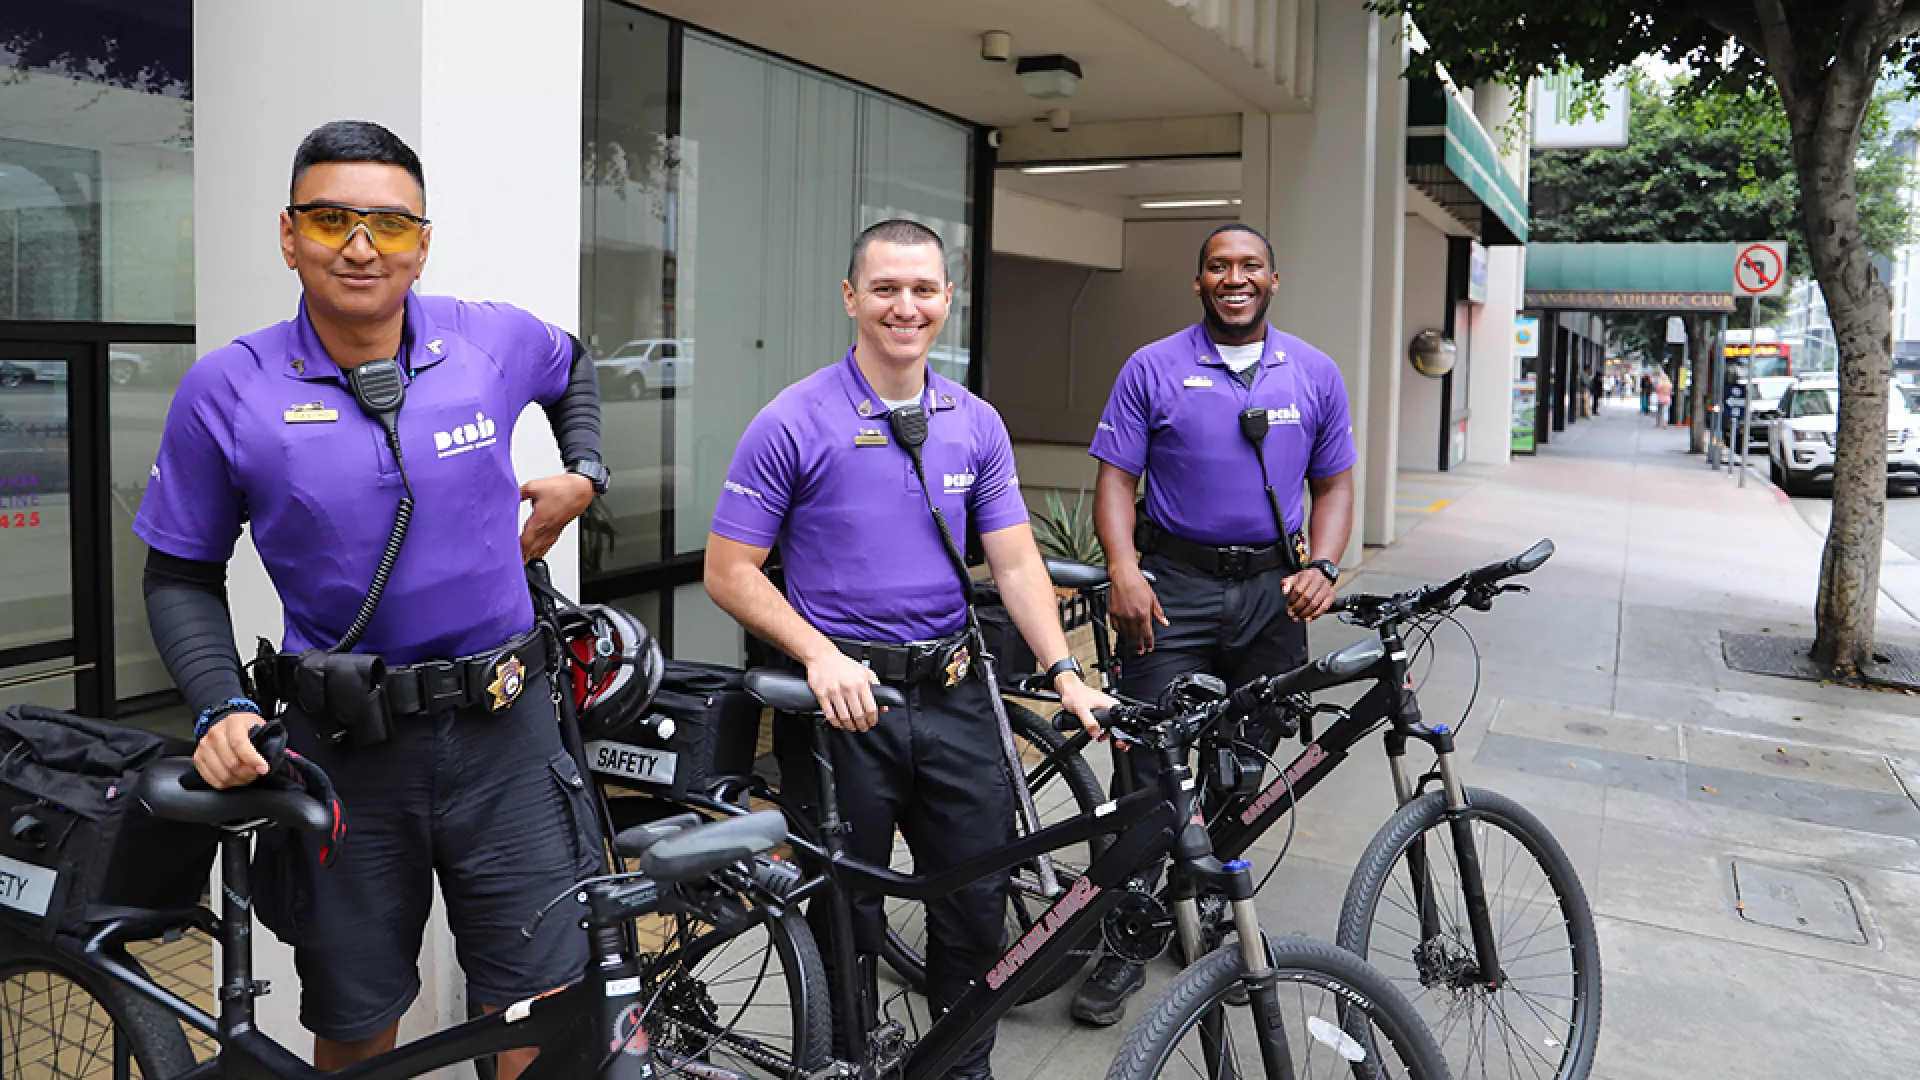 Photo of private three security patrols standing next to their bicycles in Los Angeles